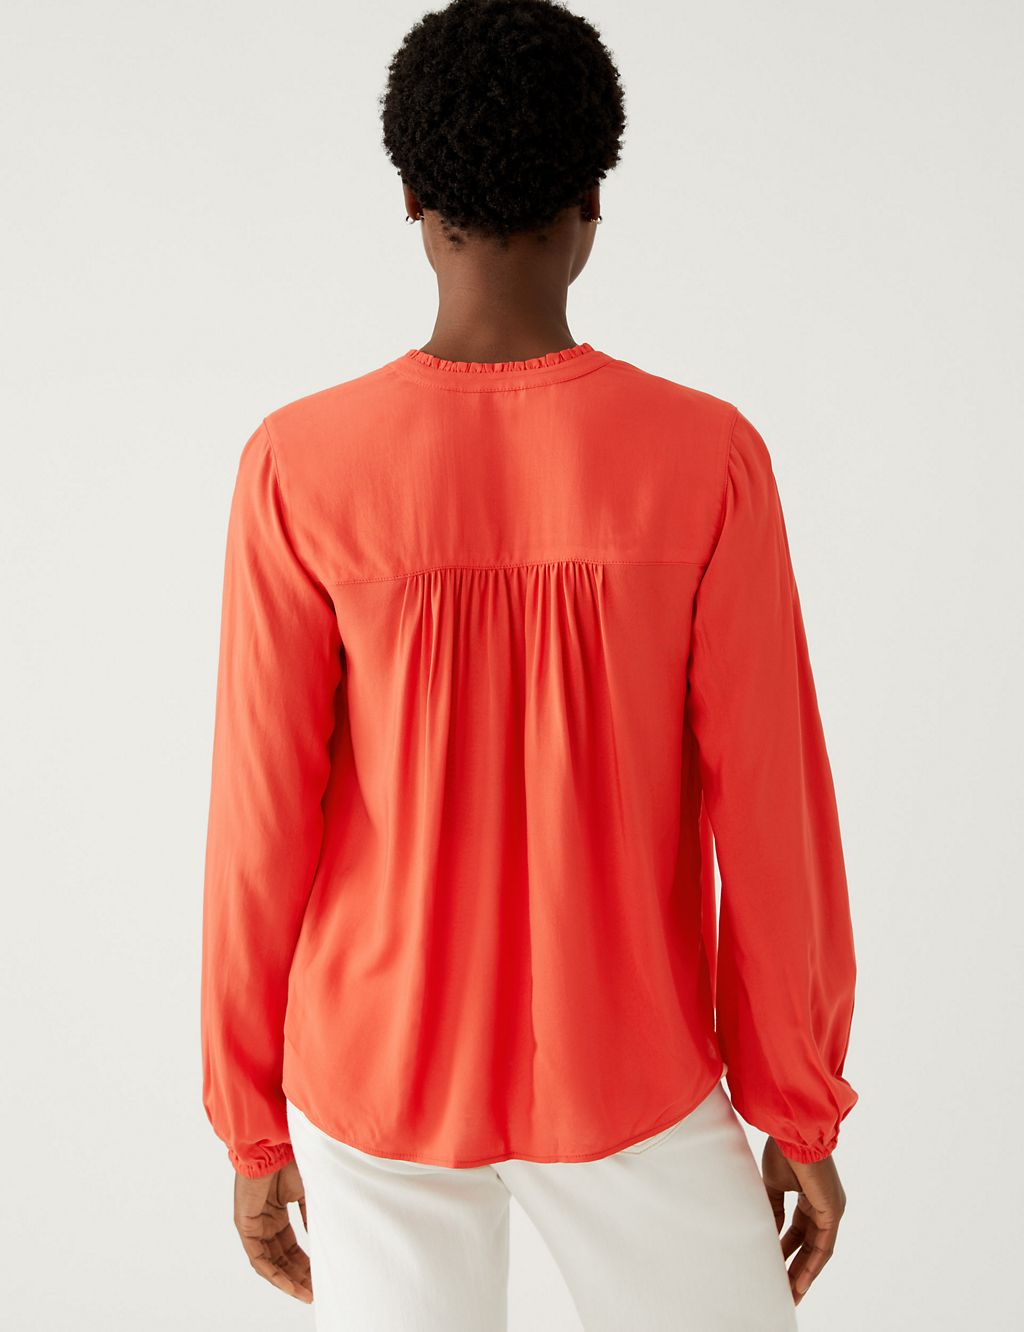 Collarless Regular Fit Long Sleeve Blouse | M&S Collection | M&S